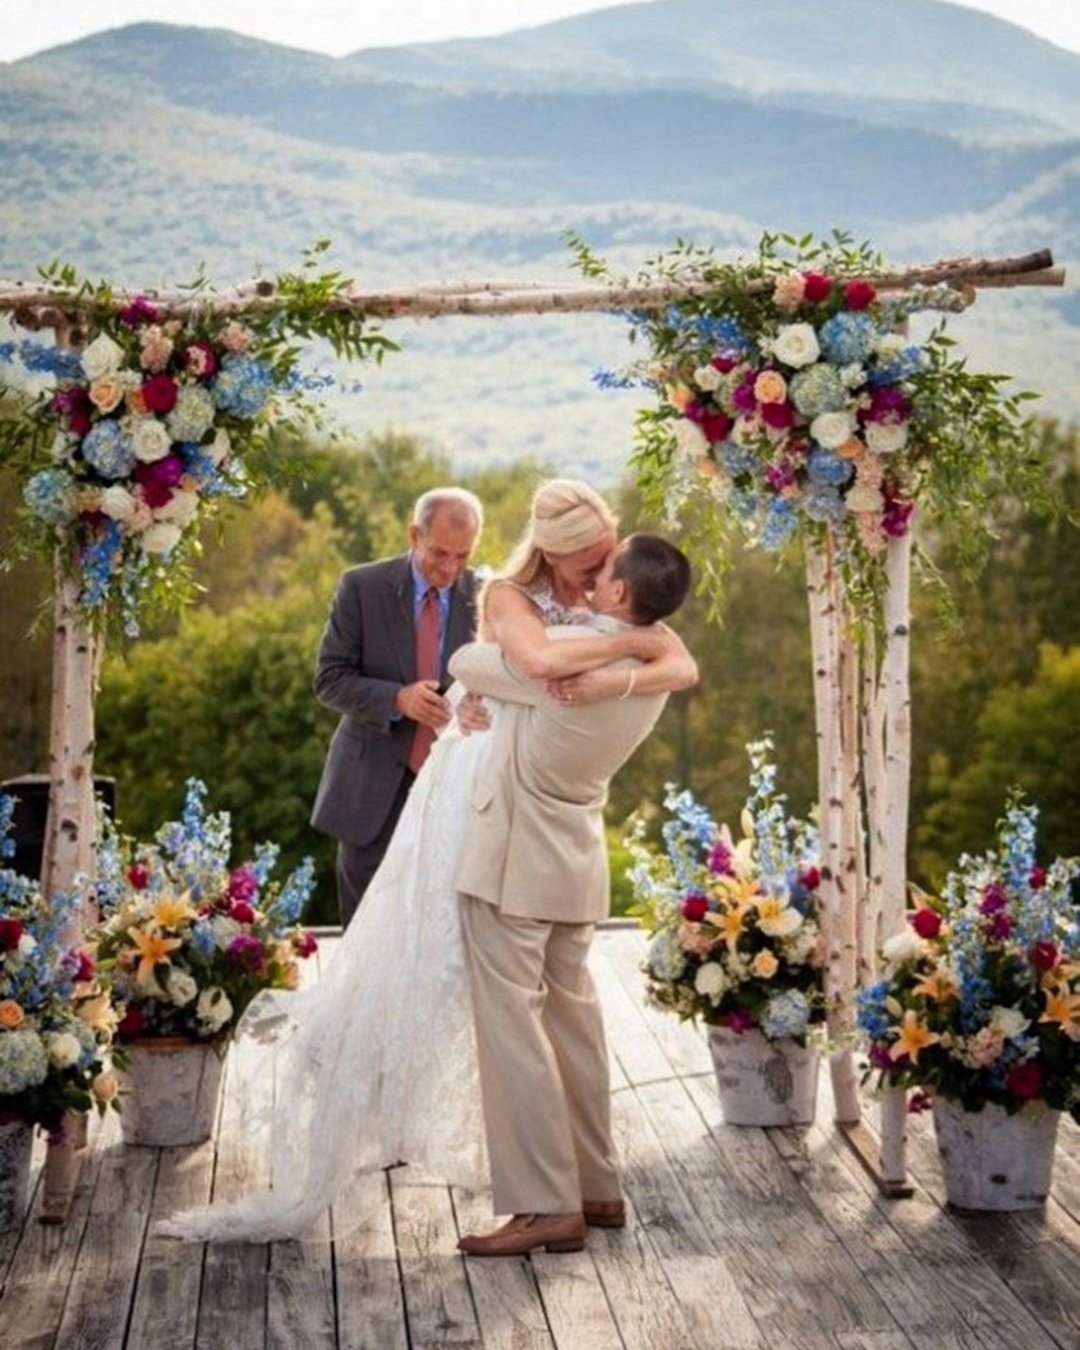 must have wedding photos kiss after ceremony mountain view athleen landwehrle photography